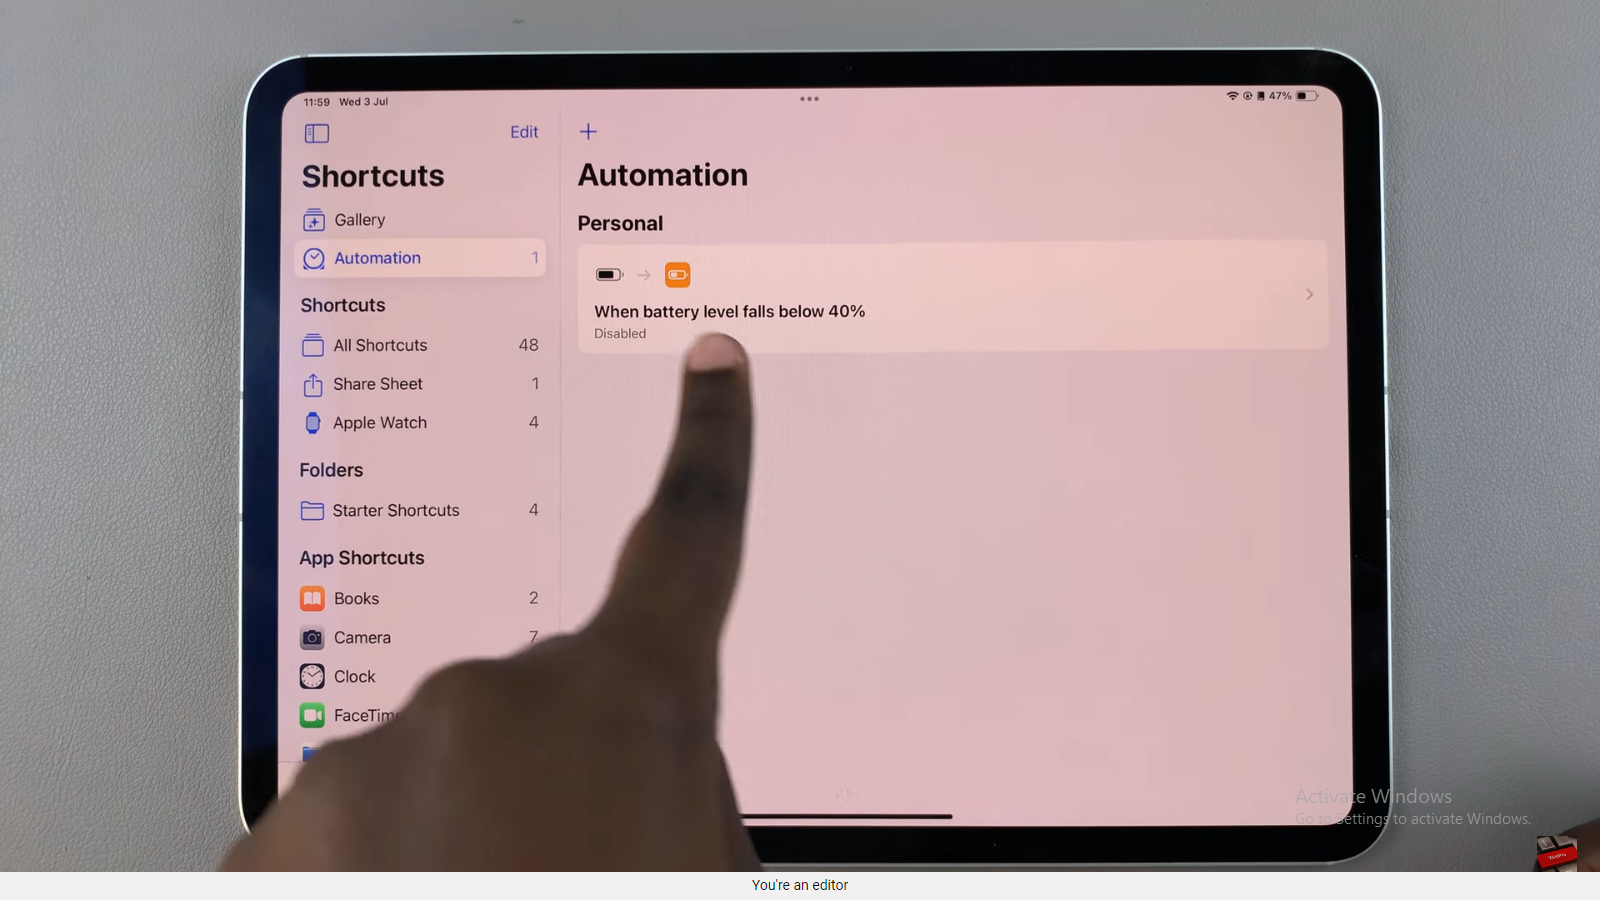 How To Disable Automation On iPad